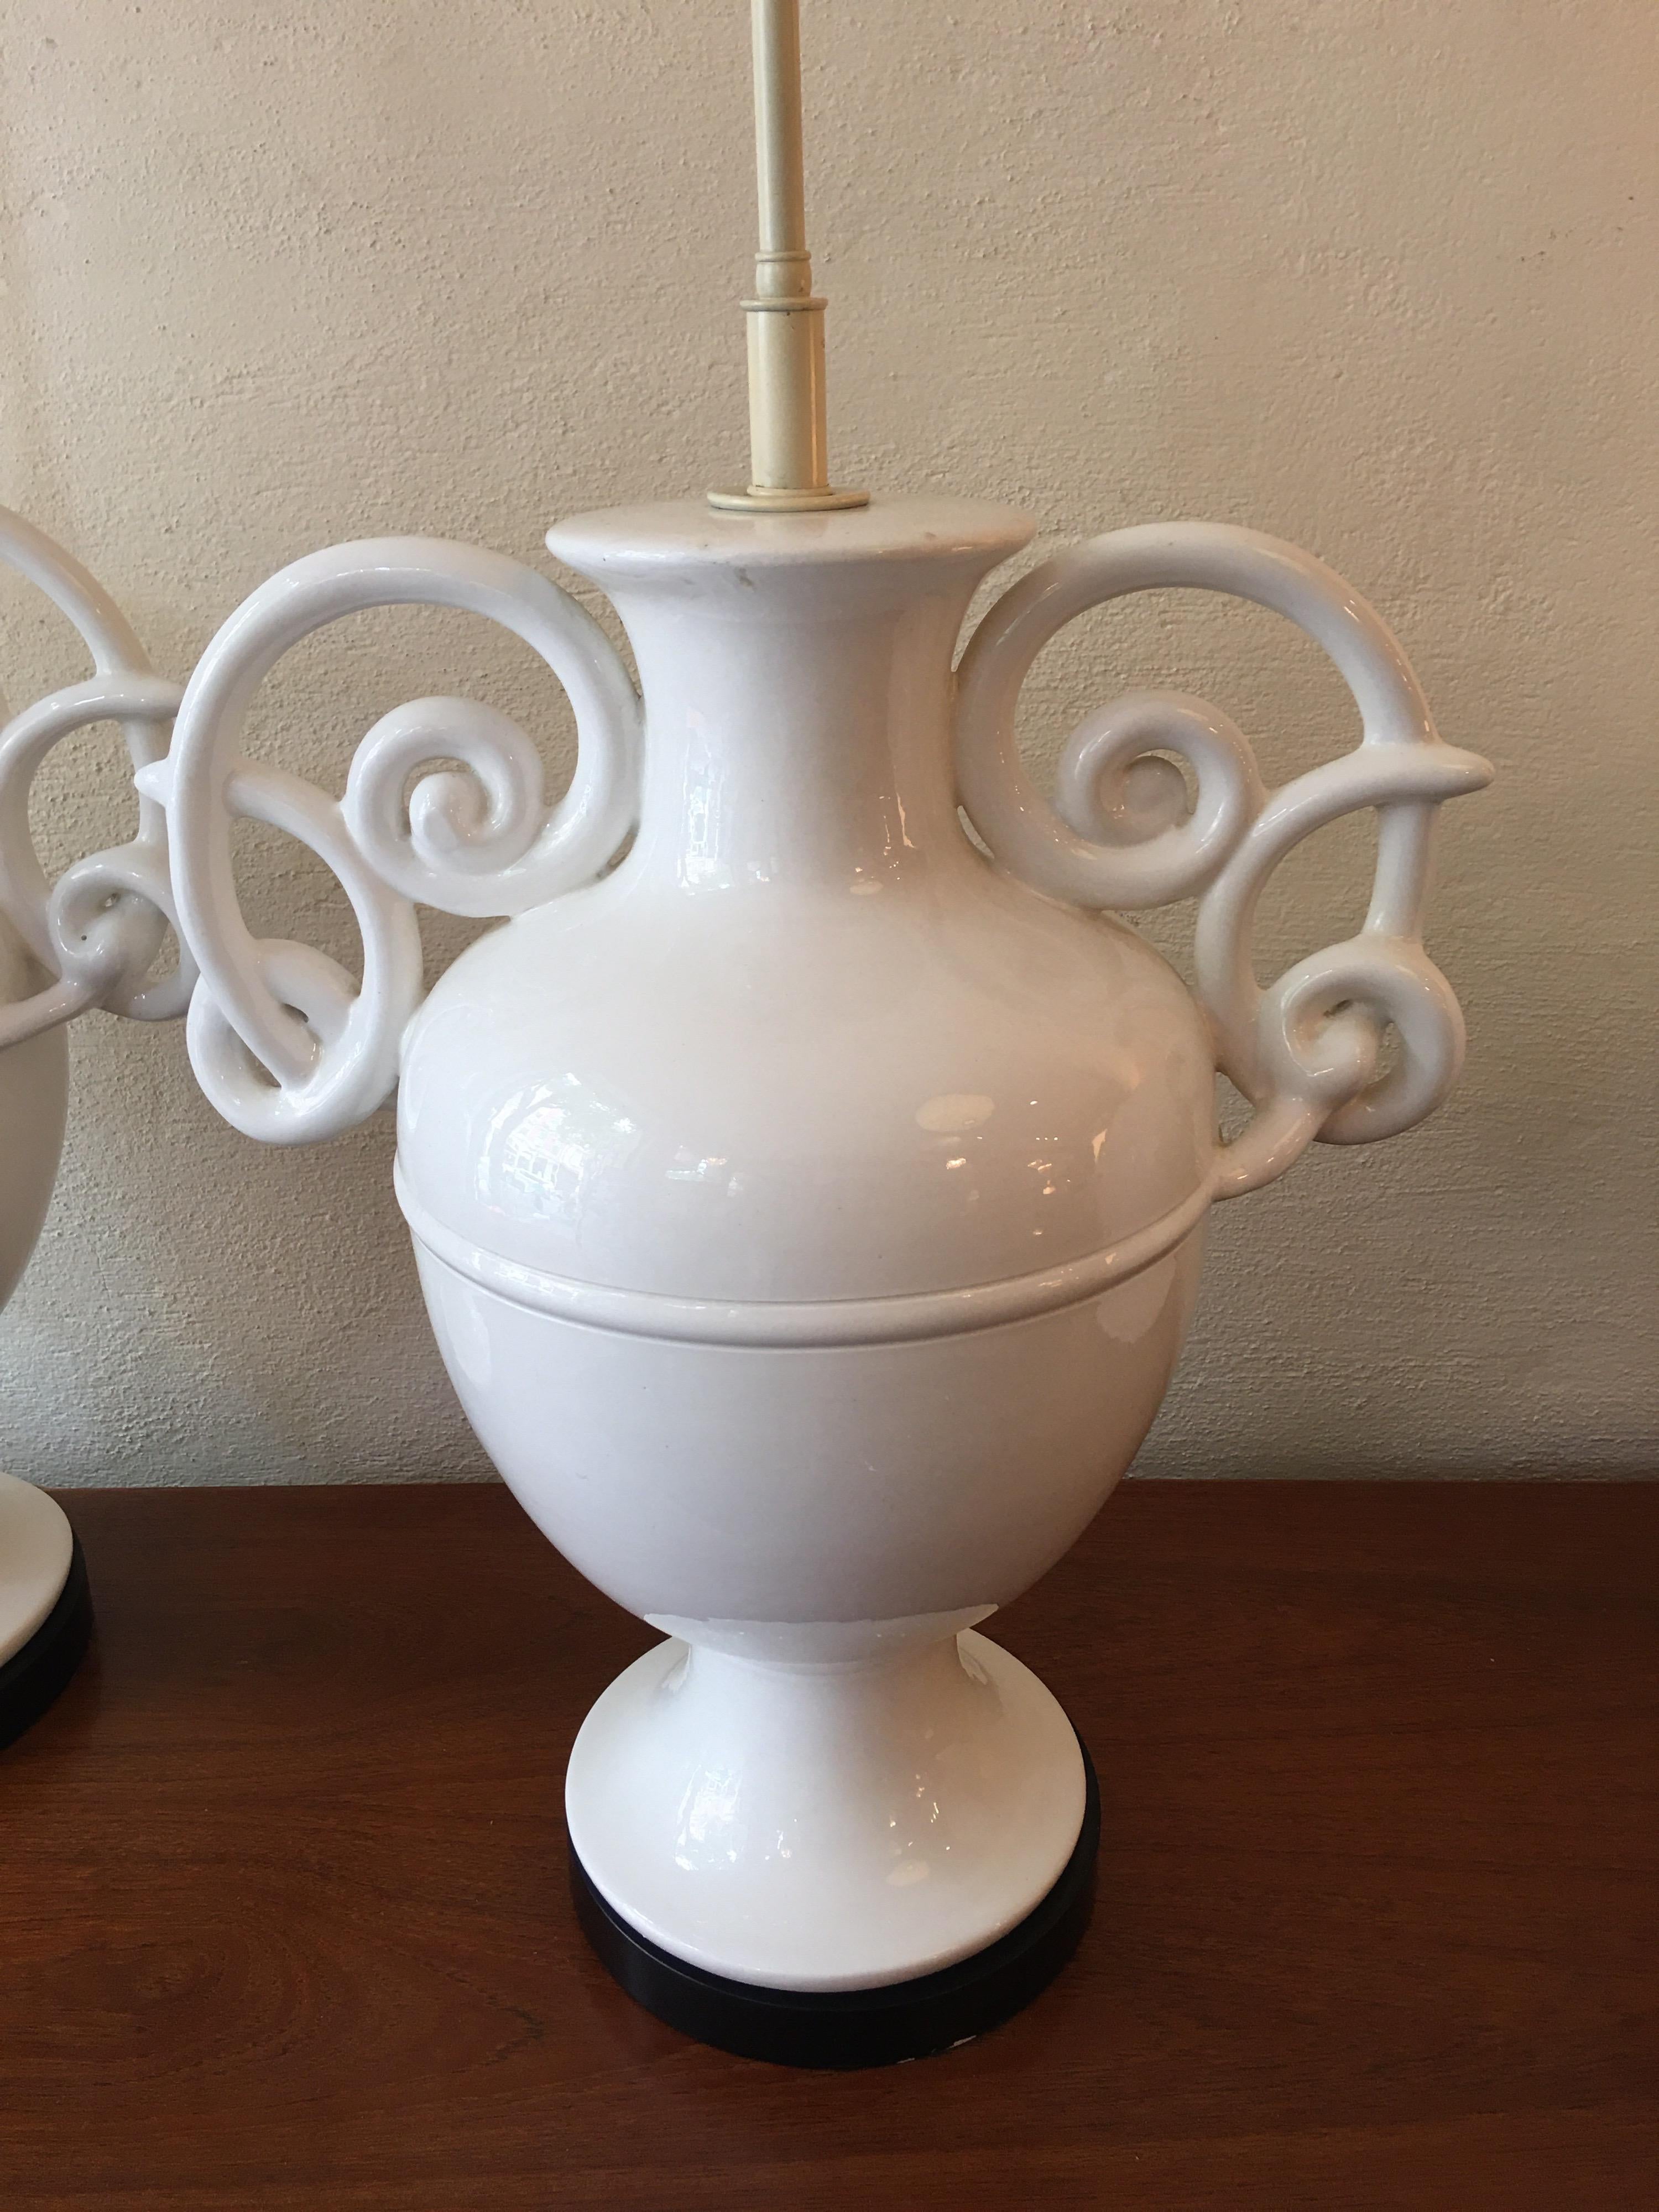 Monumental ceramic Italian urn lamps with curly handles. Amazing scale and look! These beautiful lamps can carry any room! Dating to the 1960s these lamps are in pristine condition with original shades.